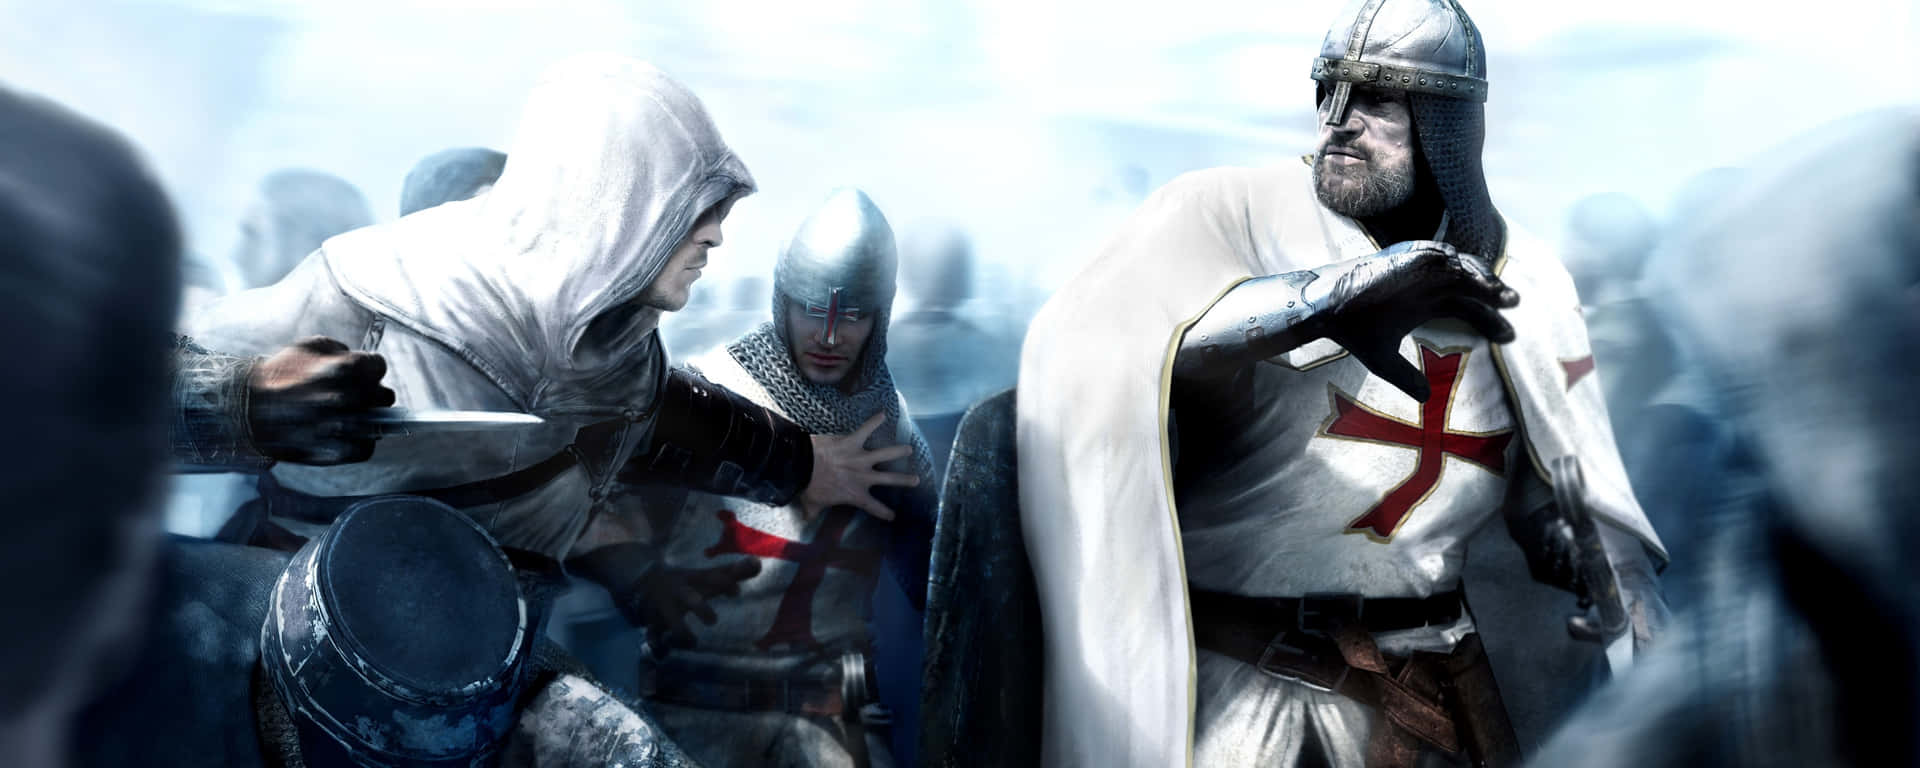 Assassin's Creed Altair in action Wallpaper